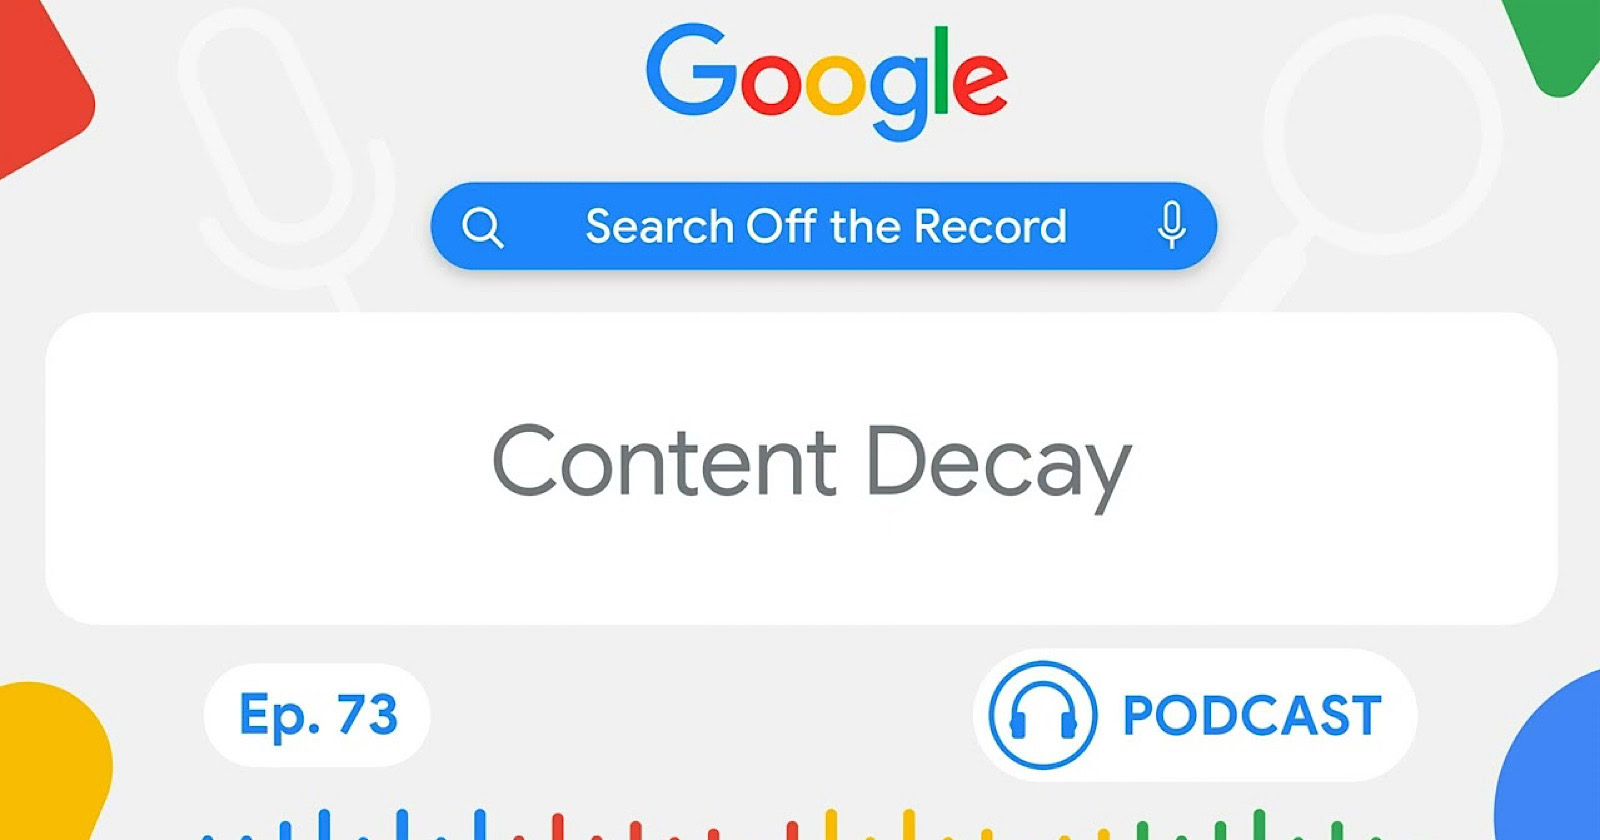 Google Defines “Content Decay” In New Podcast Episode via @sejournal, @MattGSouthern